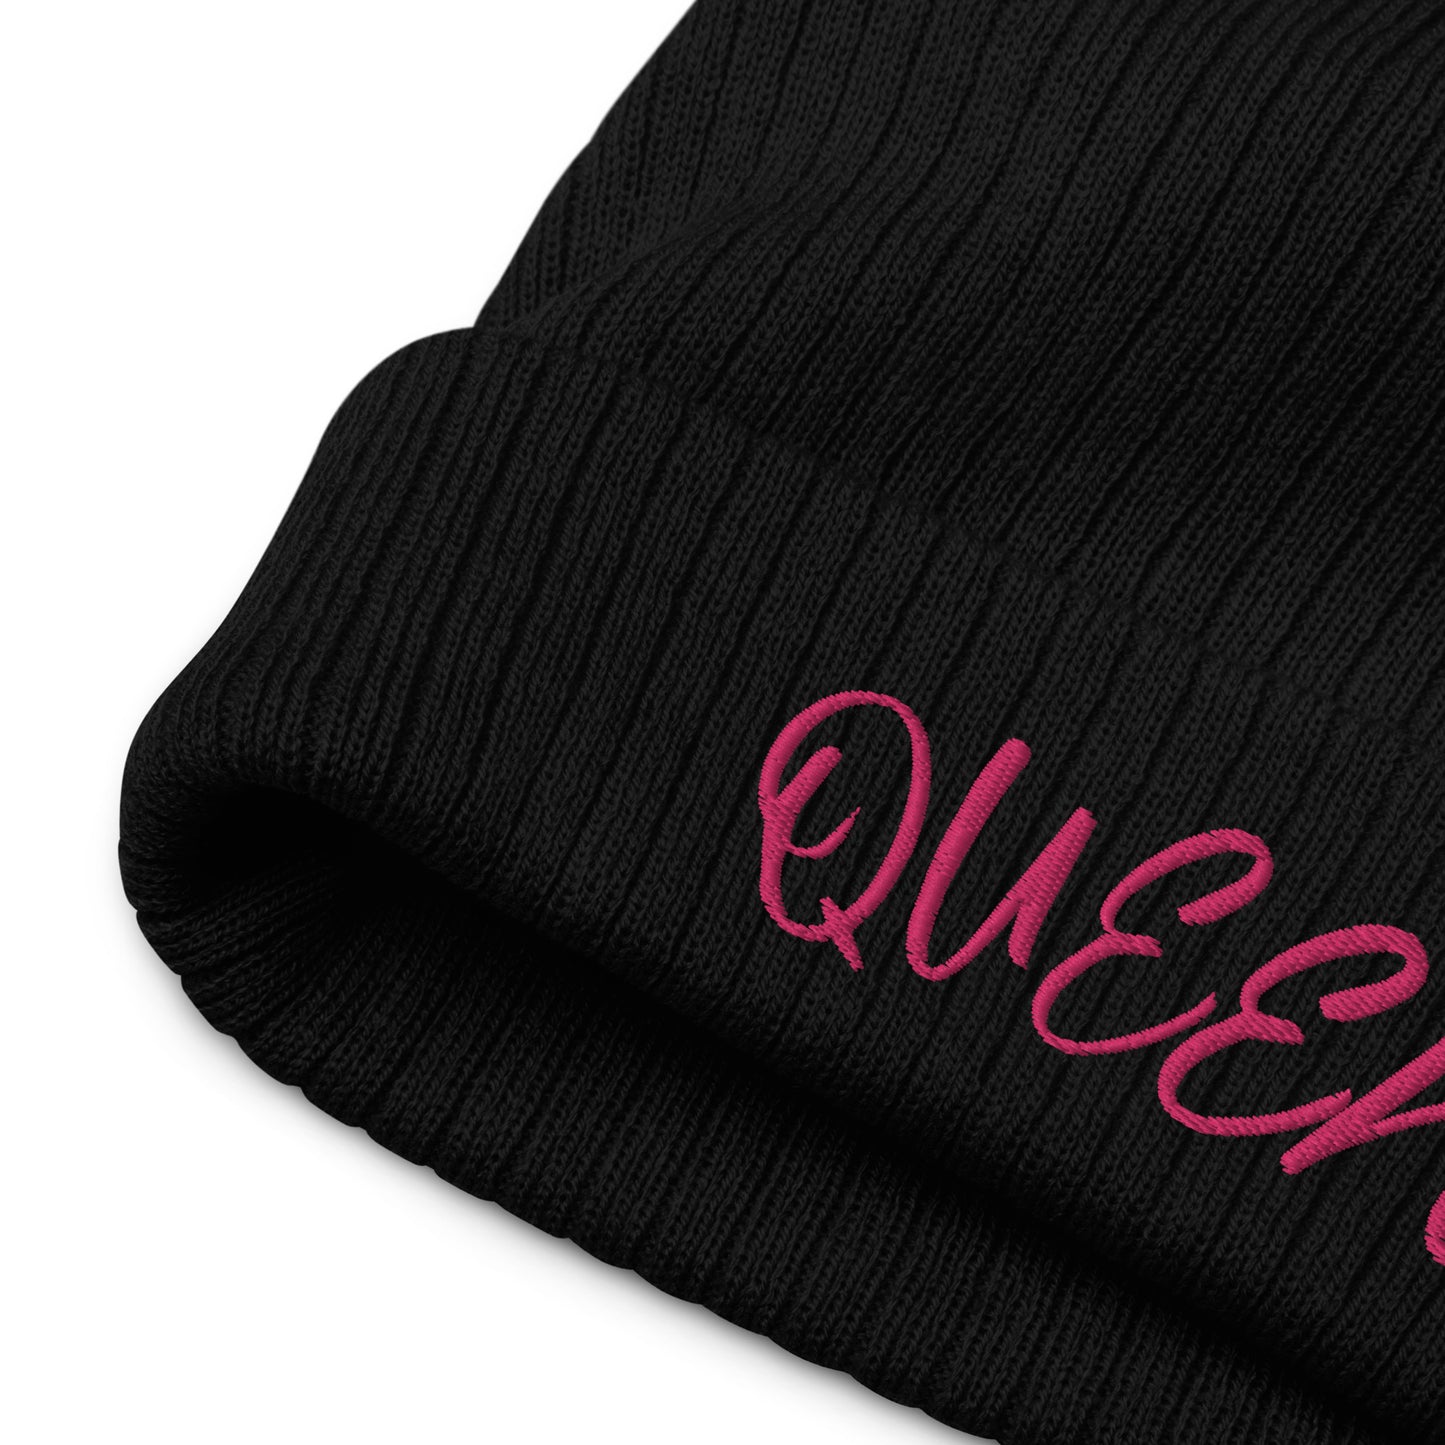 "Queen" Ribbed knit beanie